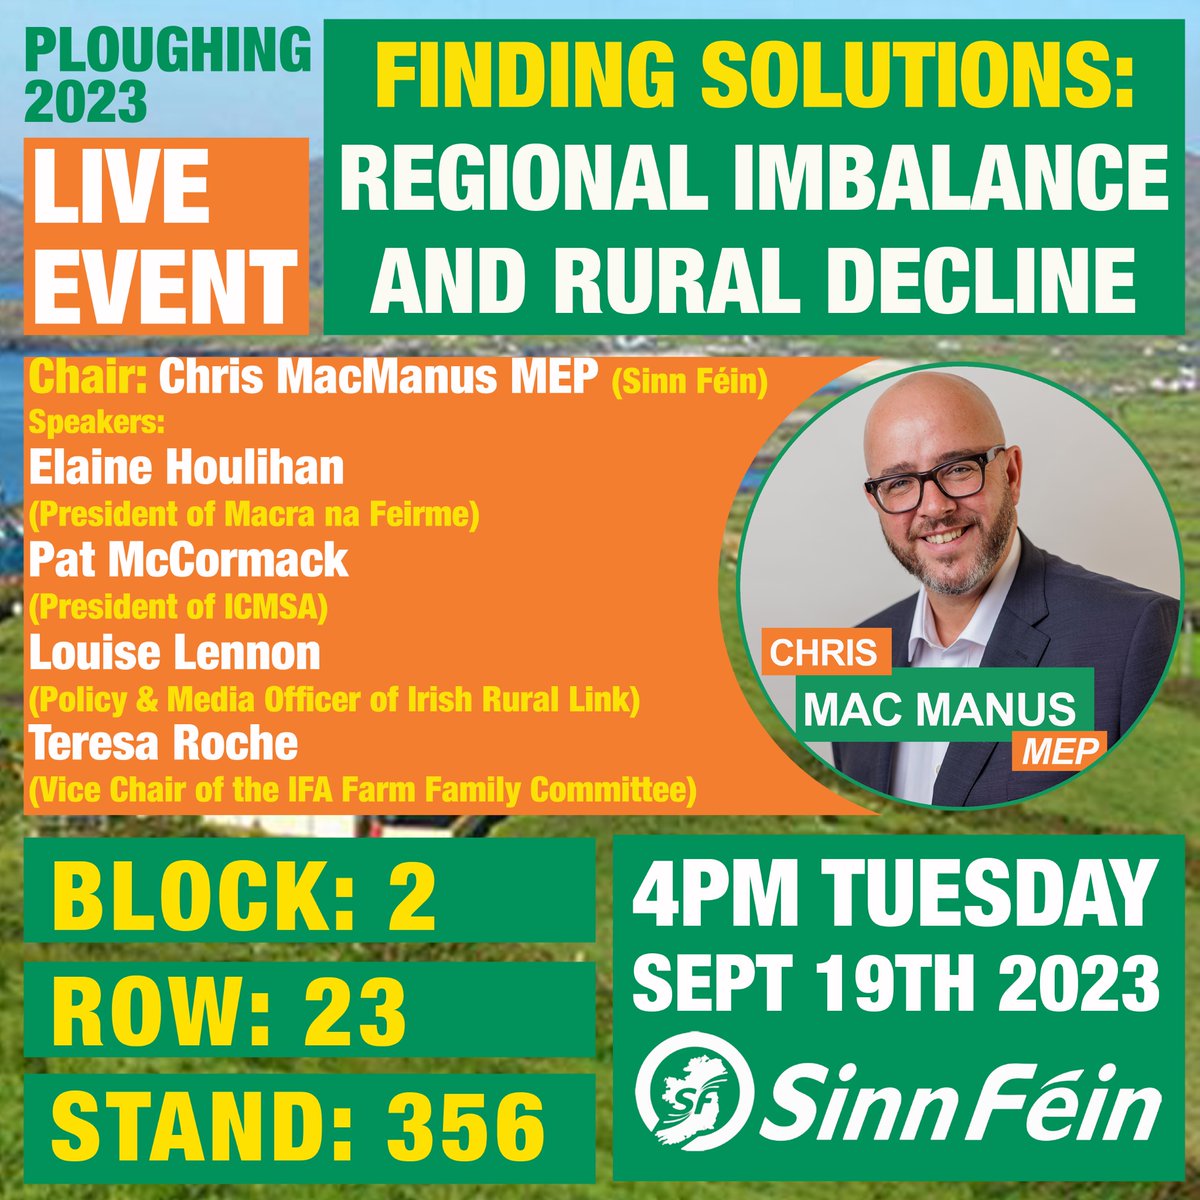 #Ploughing2023 Join us at 4pm this Tuesday at the @sinnfeinireland tent - Blk2, Rw: 23 Stnd:356 for our live event about regional imbalance & Rural Decline. I will be joined by reps from @MacranaFeirme, @icmsa, @irishrurallink @IFAmedia to discuss tangible & urgent solutions.